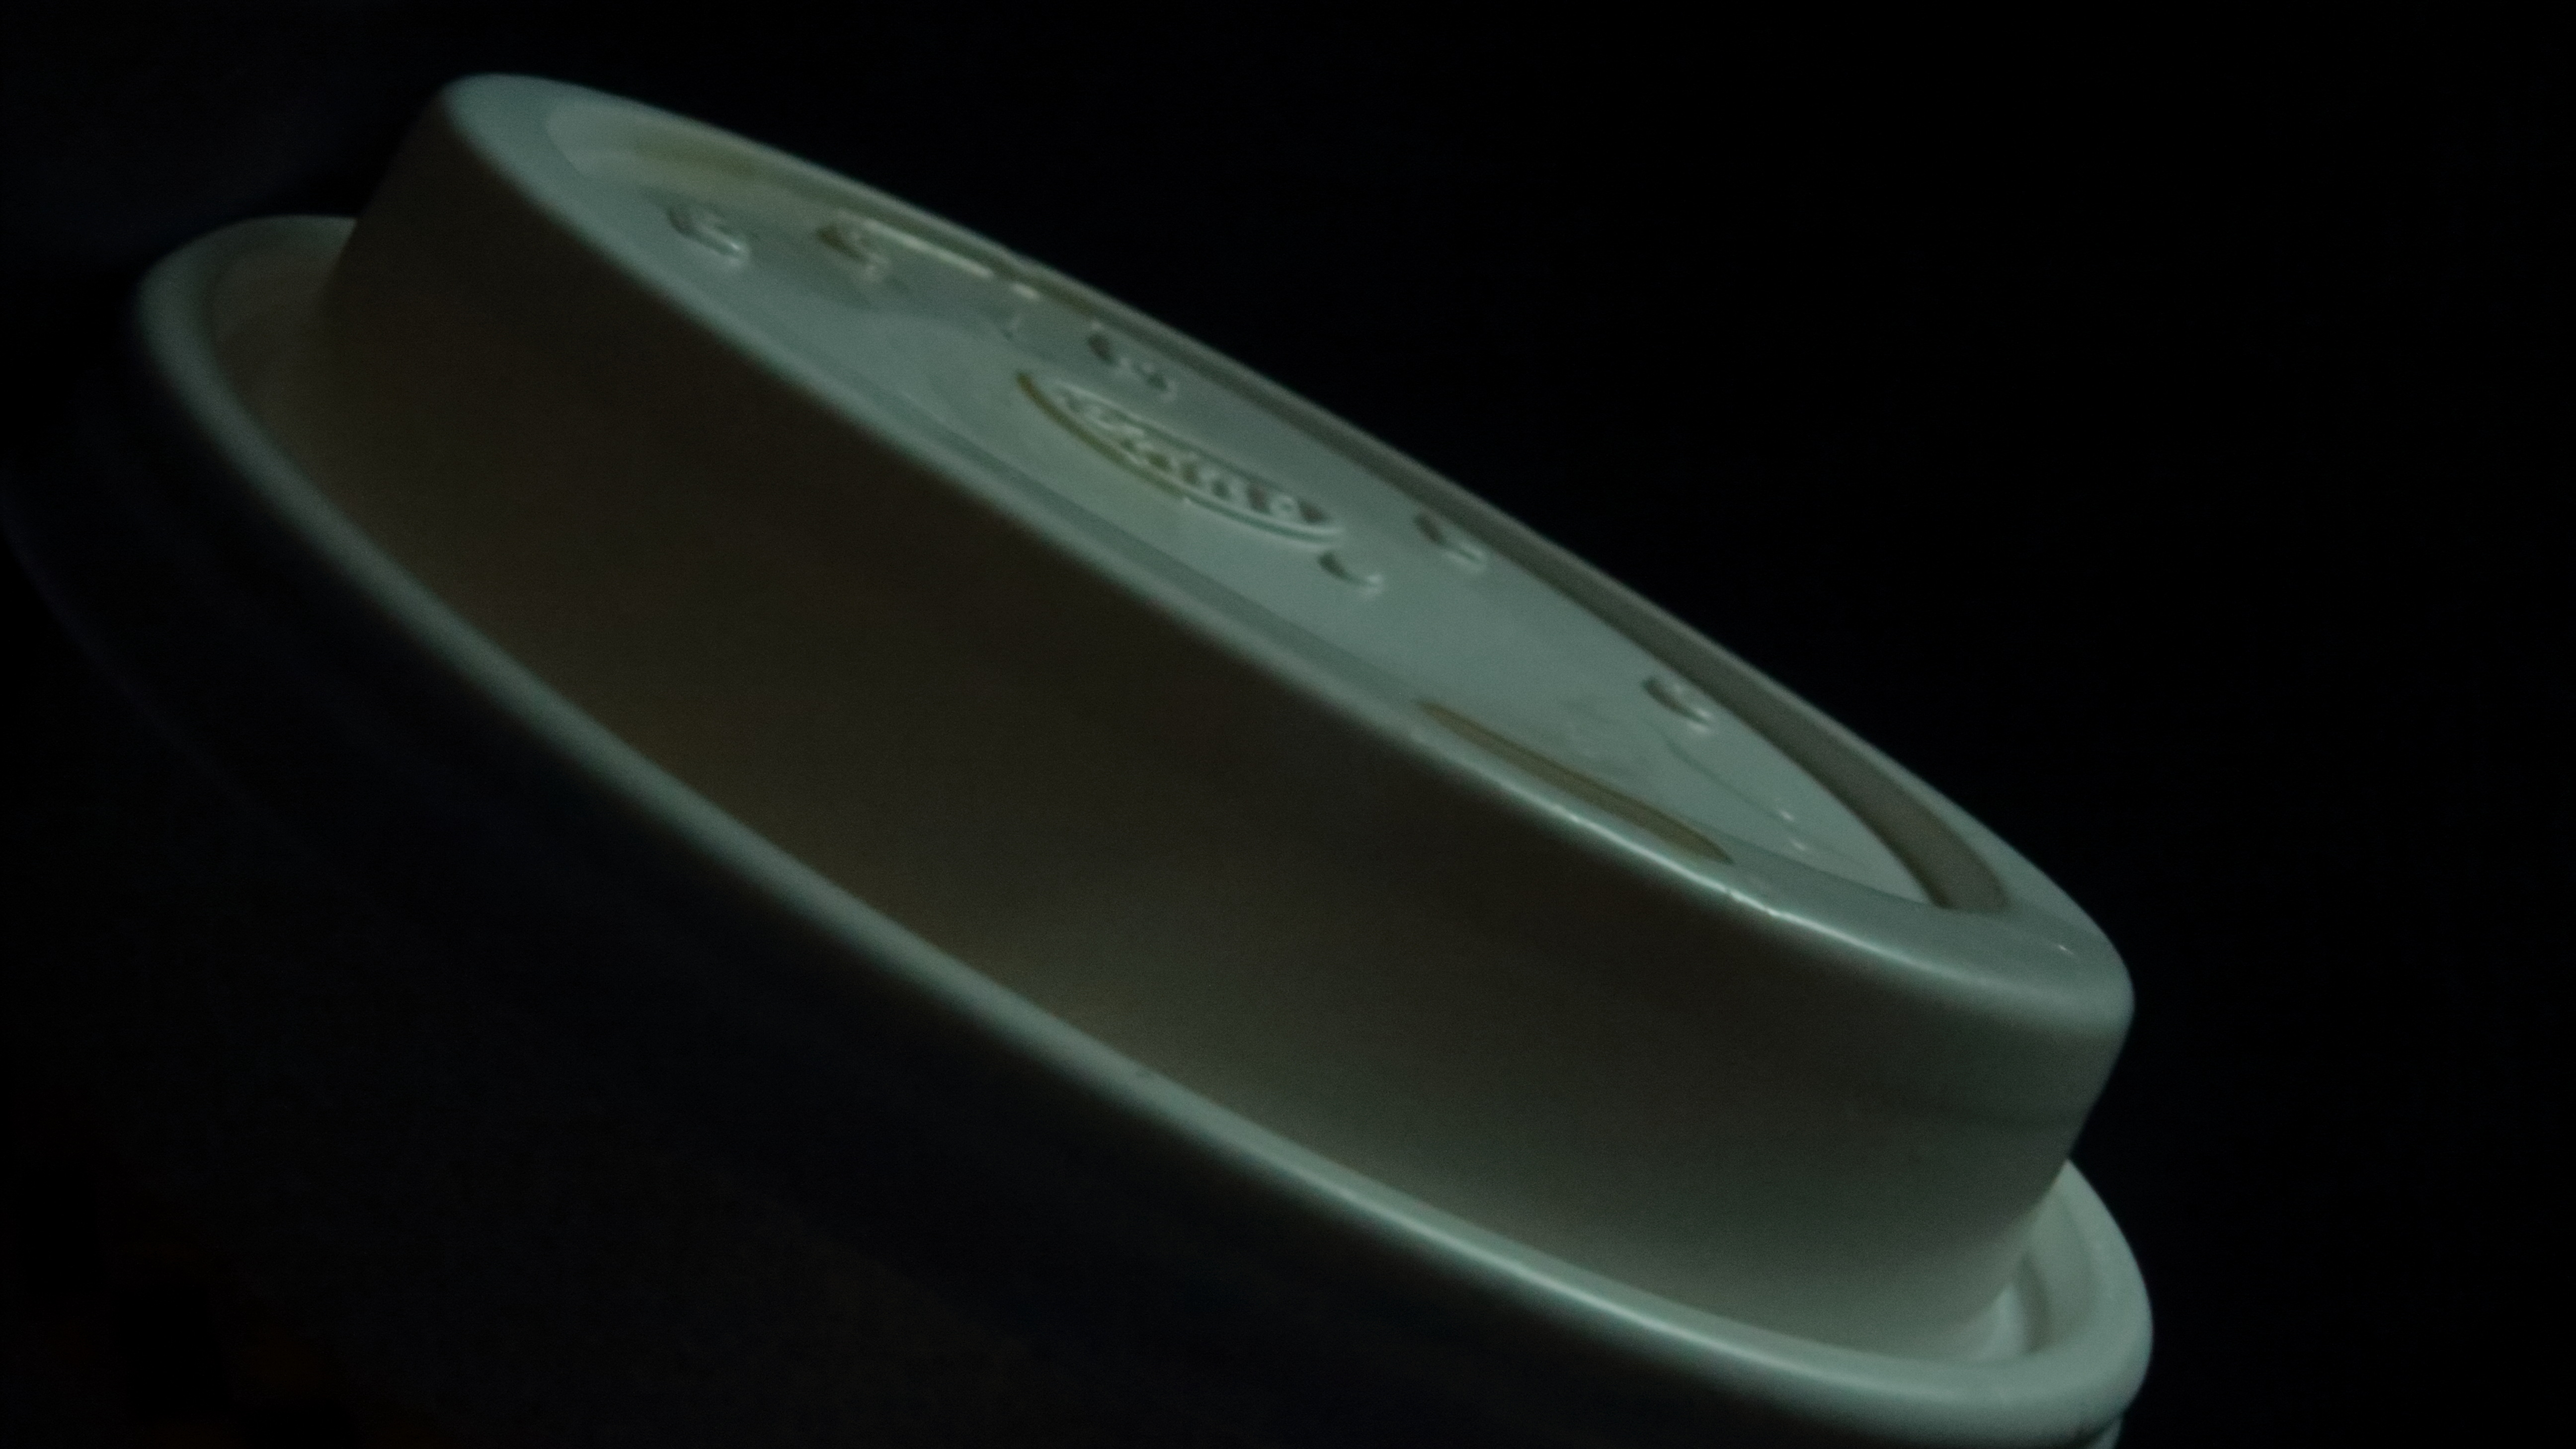 A very stylized picture of a plastic lid